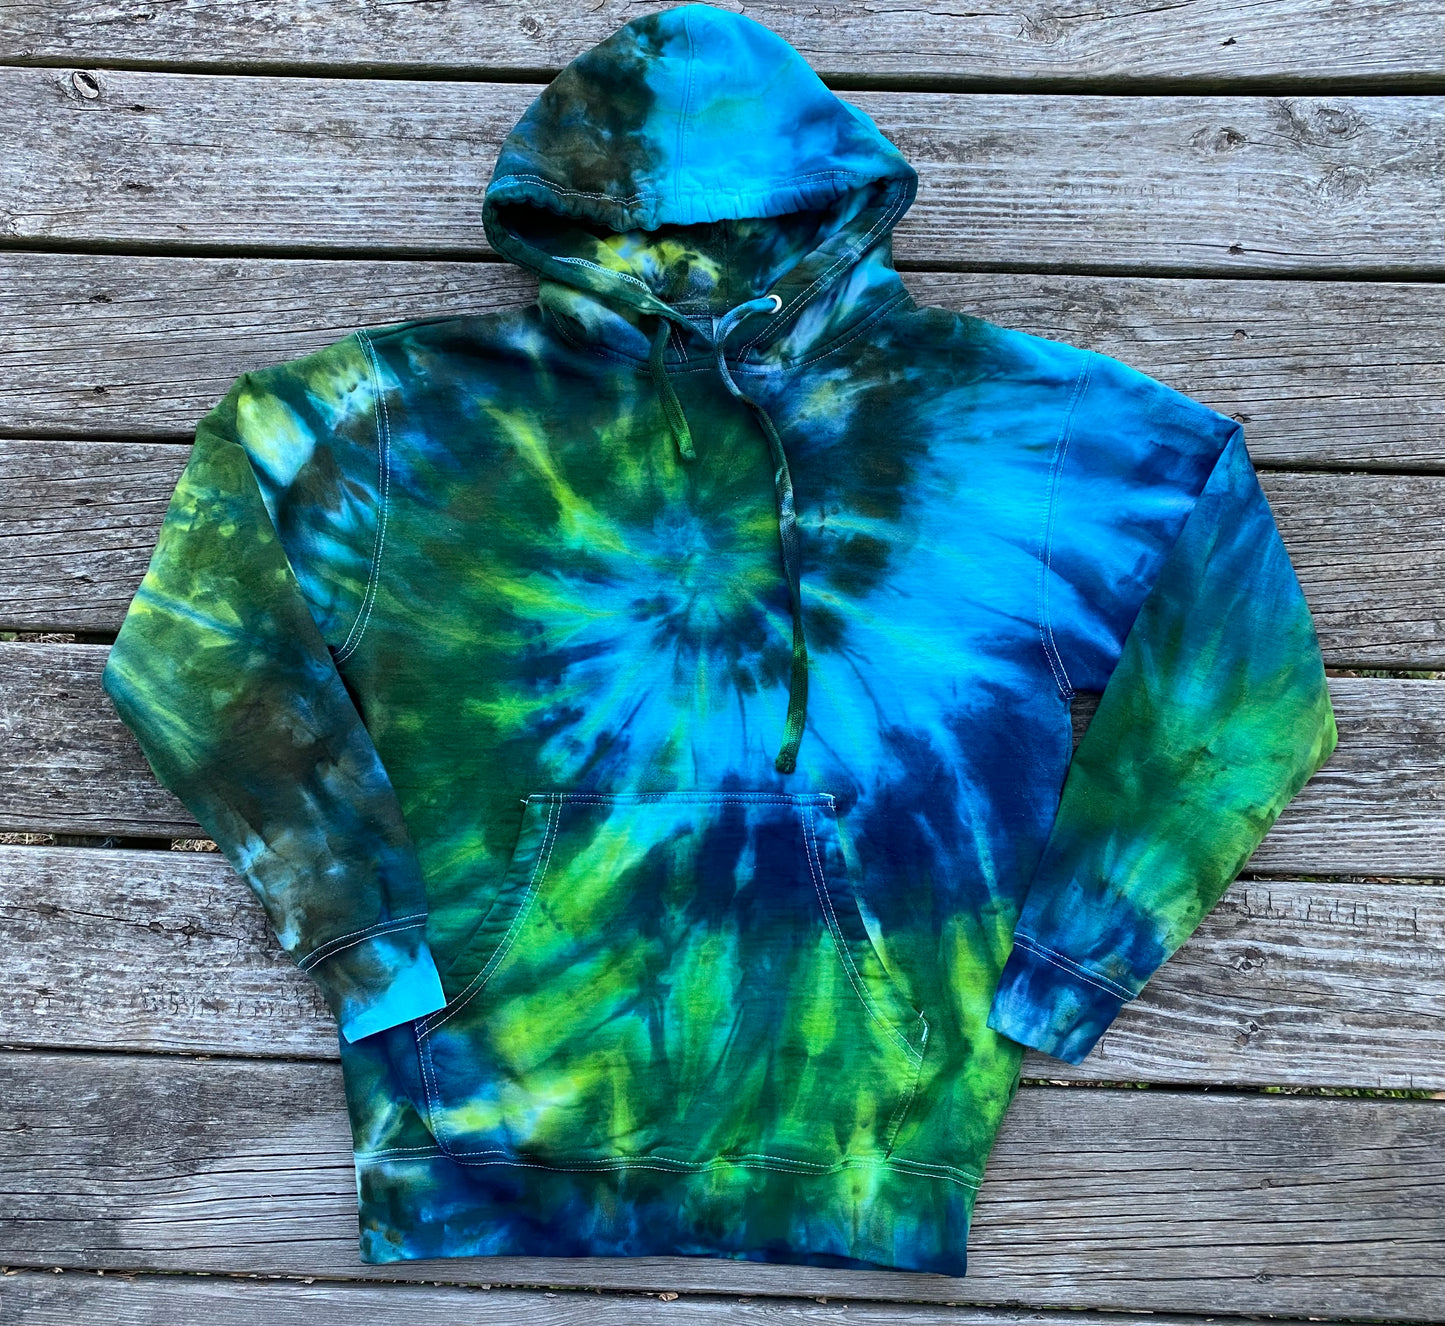 Medium unisex adult hoodie midweight ice dye blues and greens spiral